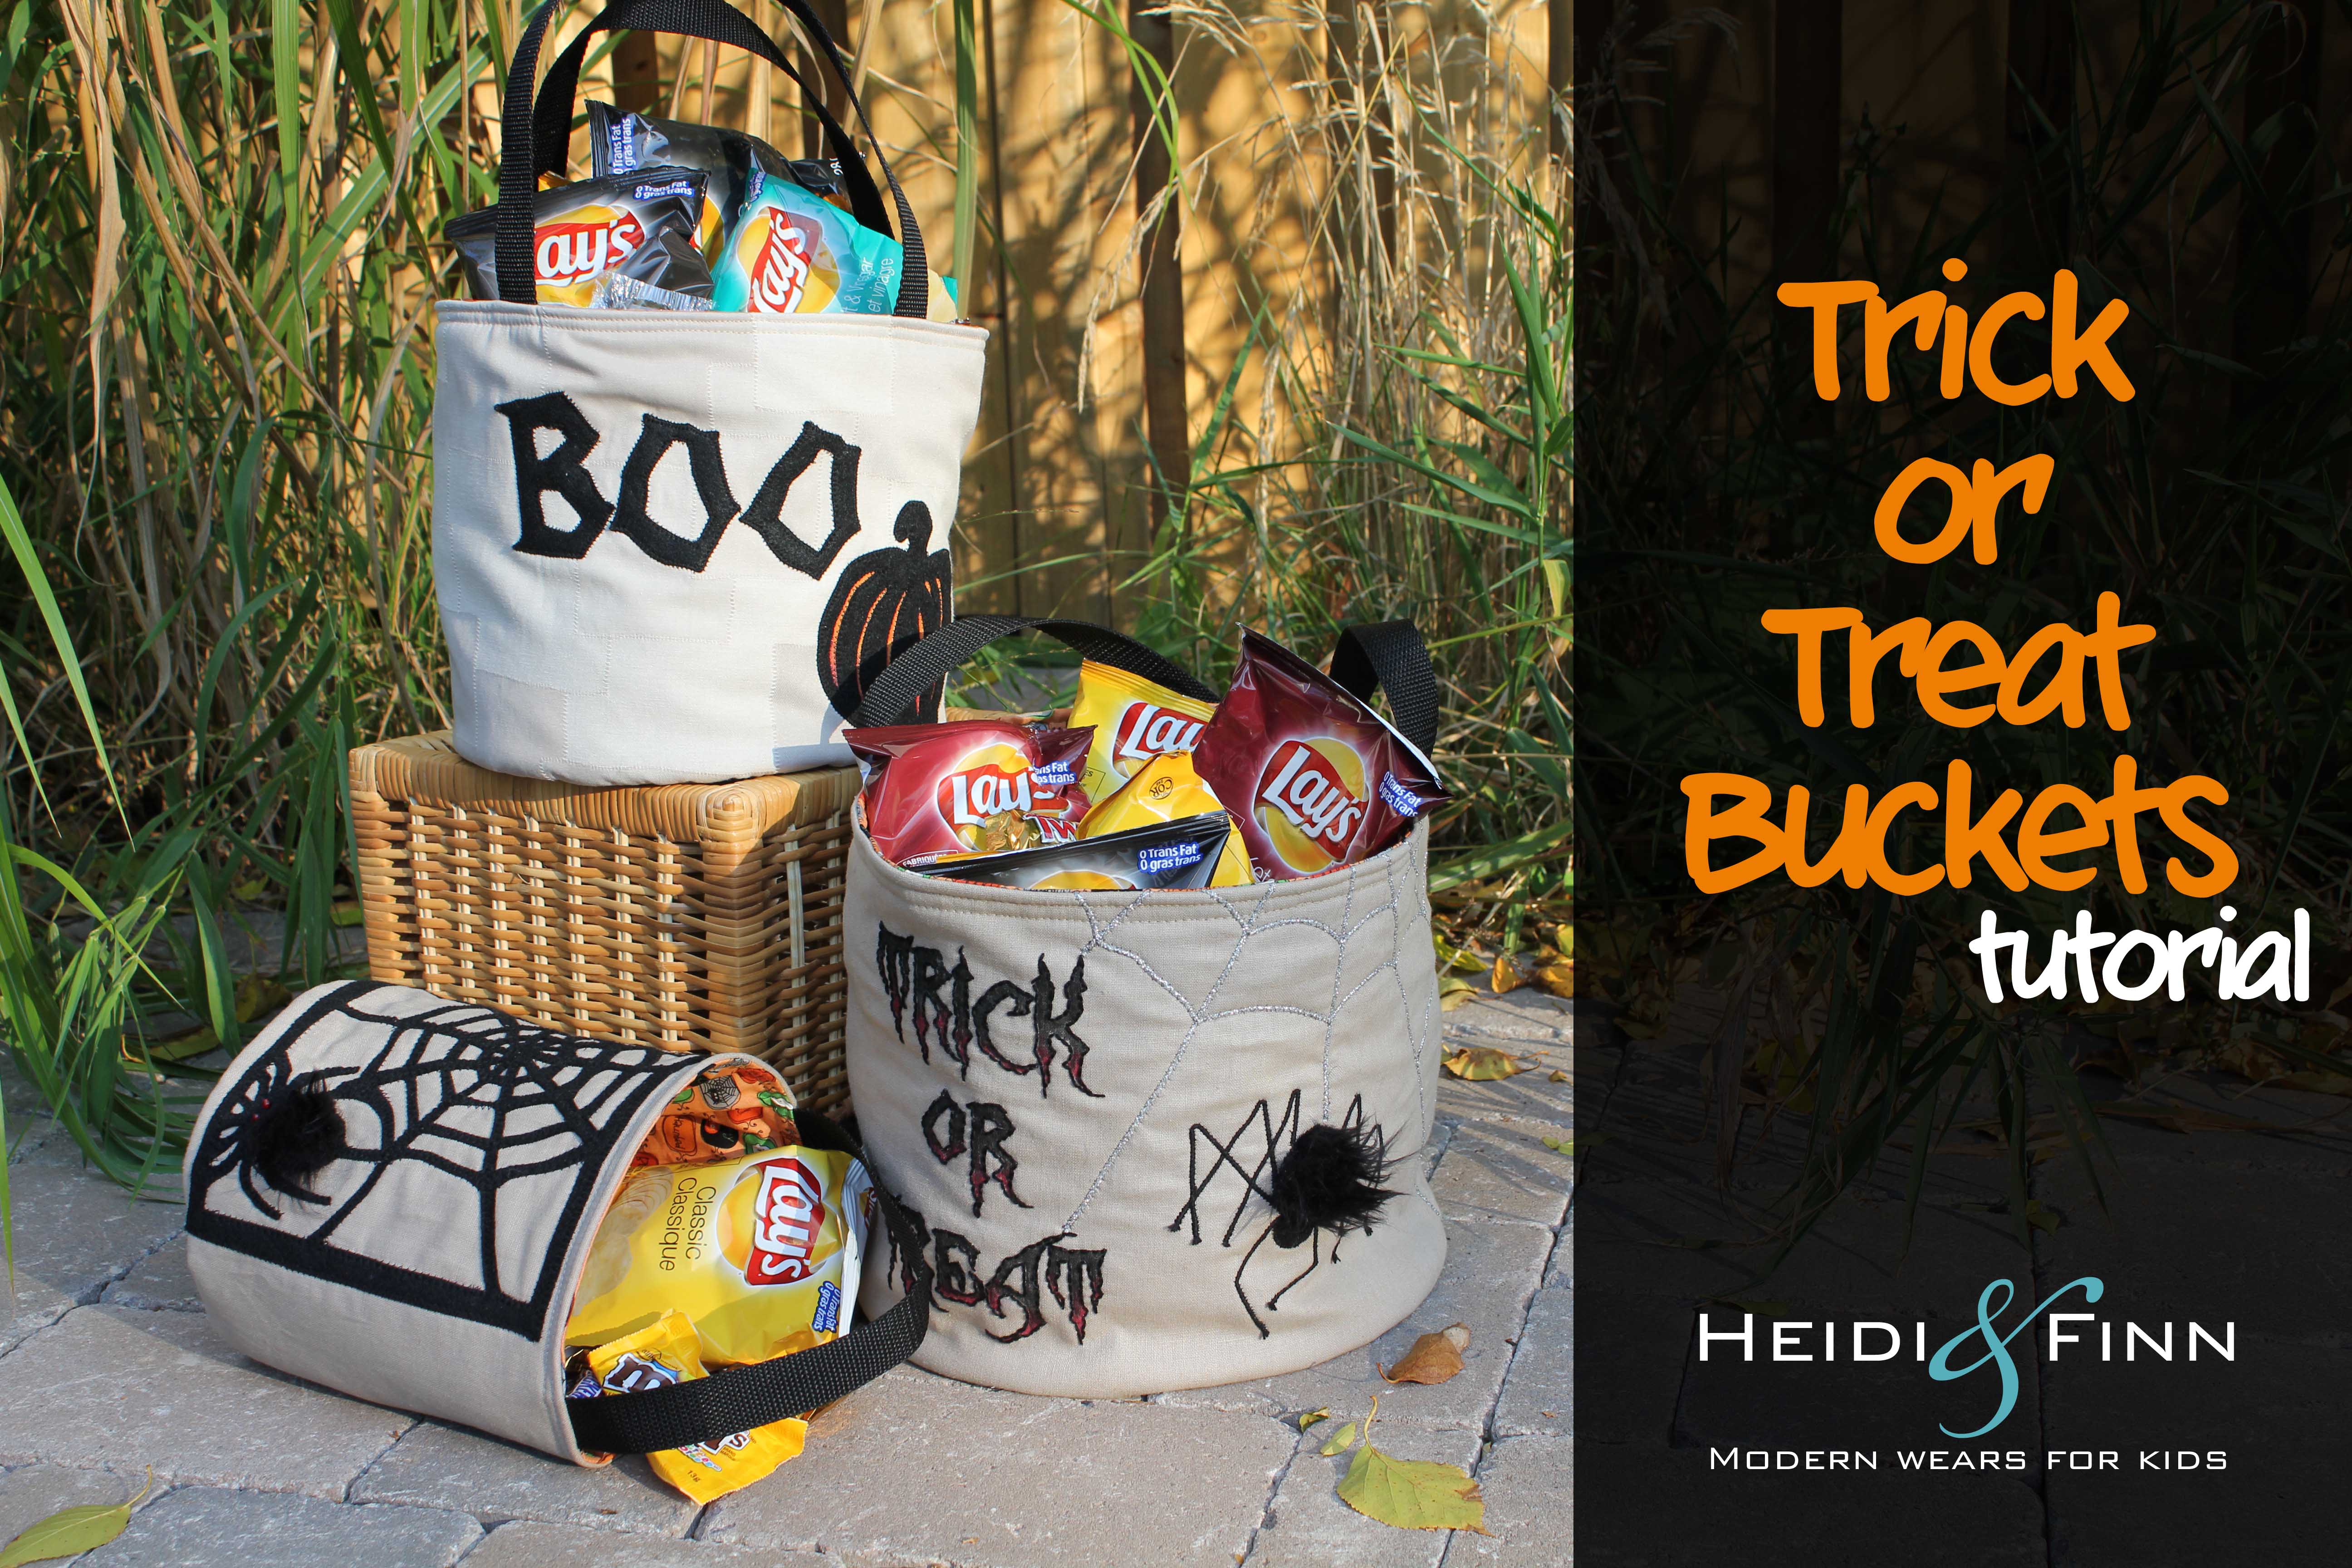 Trick or Treat Buckets - FREE